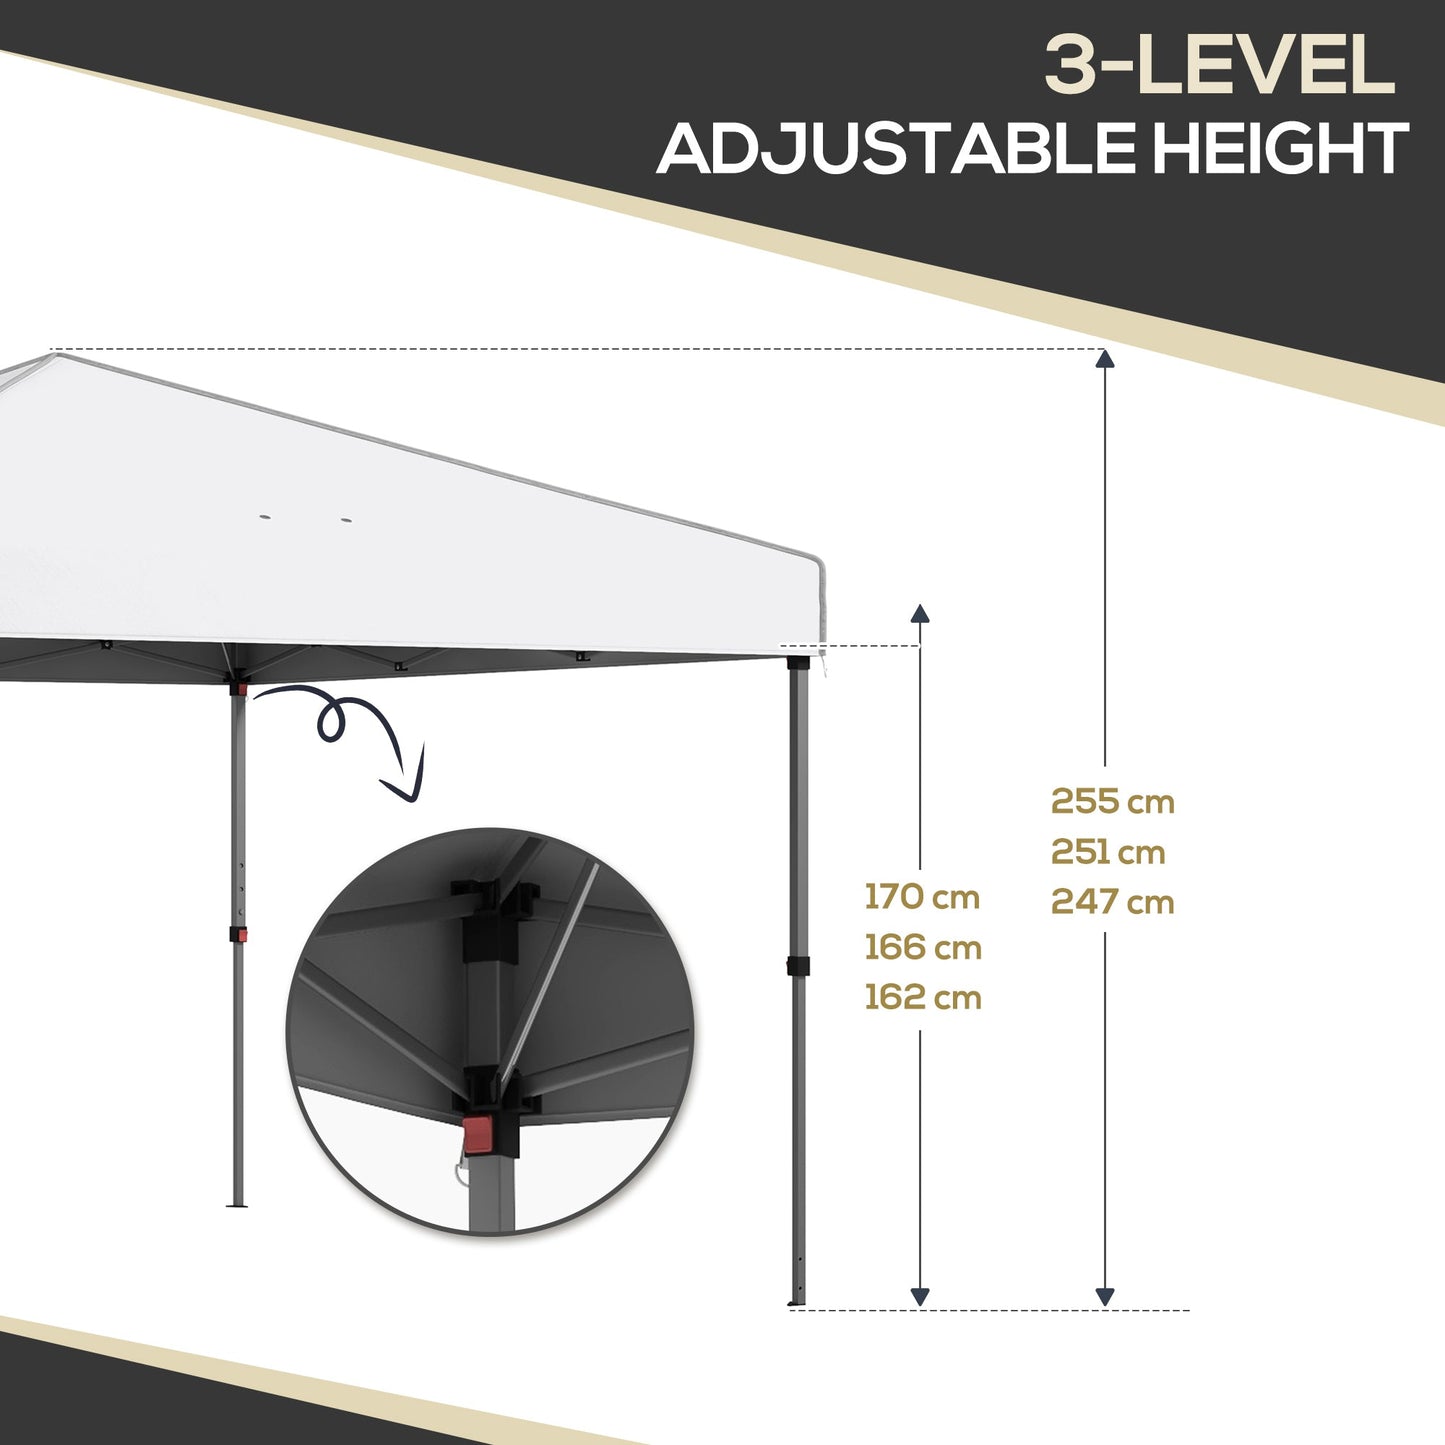 -Outsunny 10'x10' Pop Up Canopy with 2 Mesh Windows, Reflective Top, Instant Shelter Gazebo with Adjustable Heights, White - Outdoor Style Company